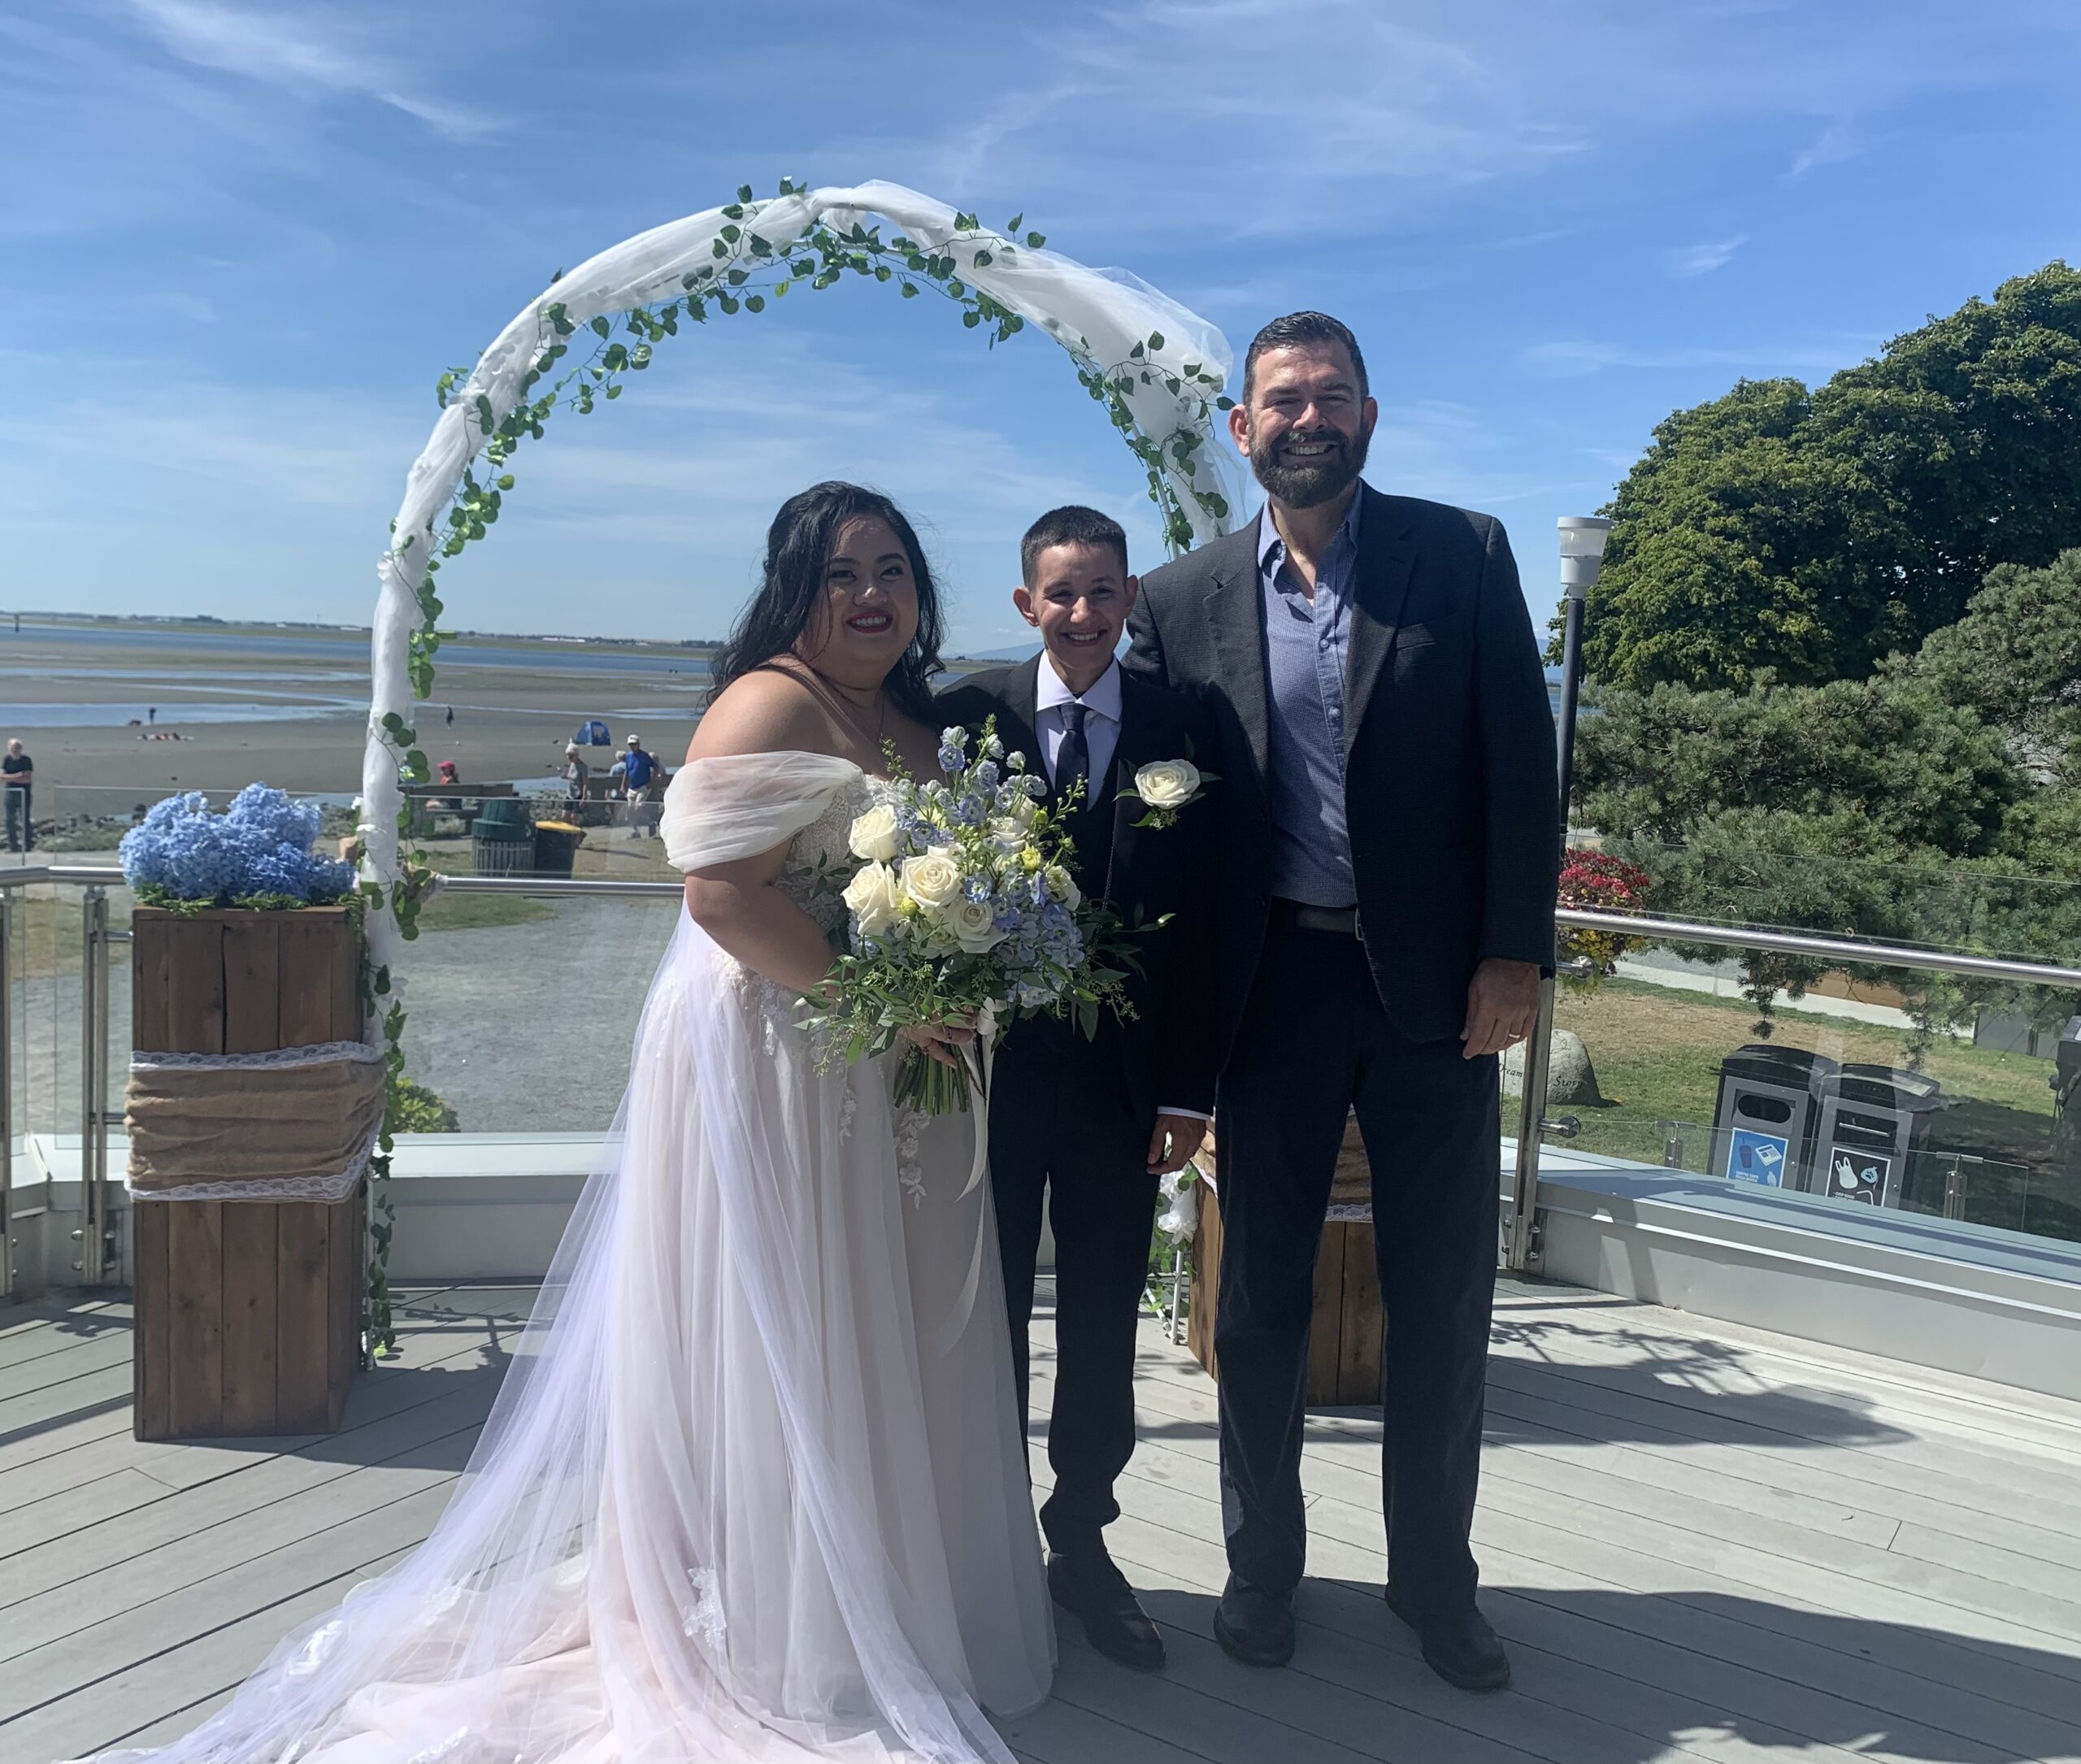 Camille and Nick wedding with Young Hip & Married wedding officiant Curt 